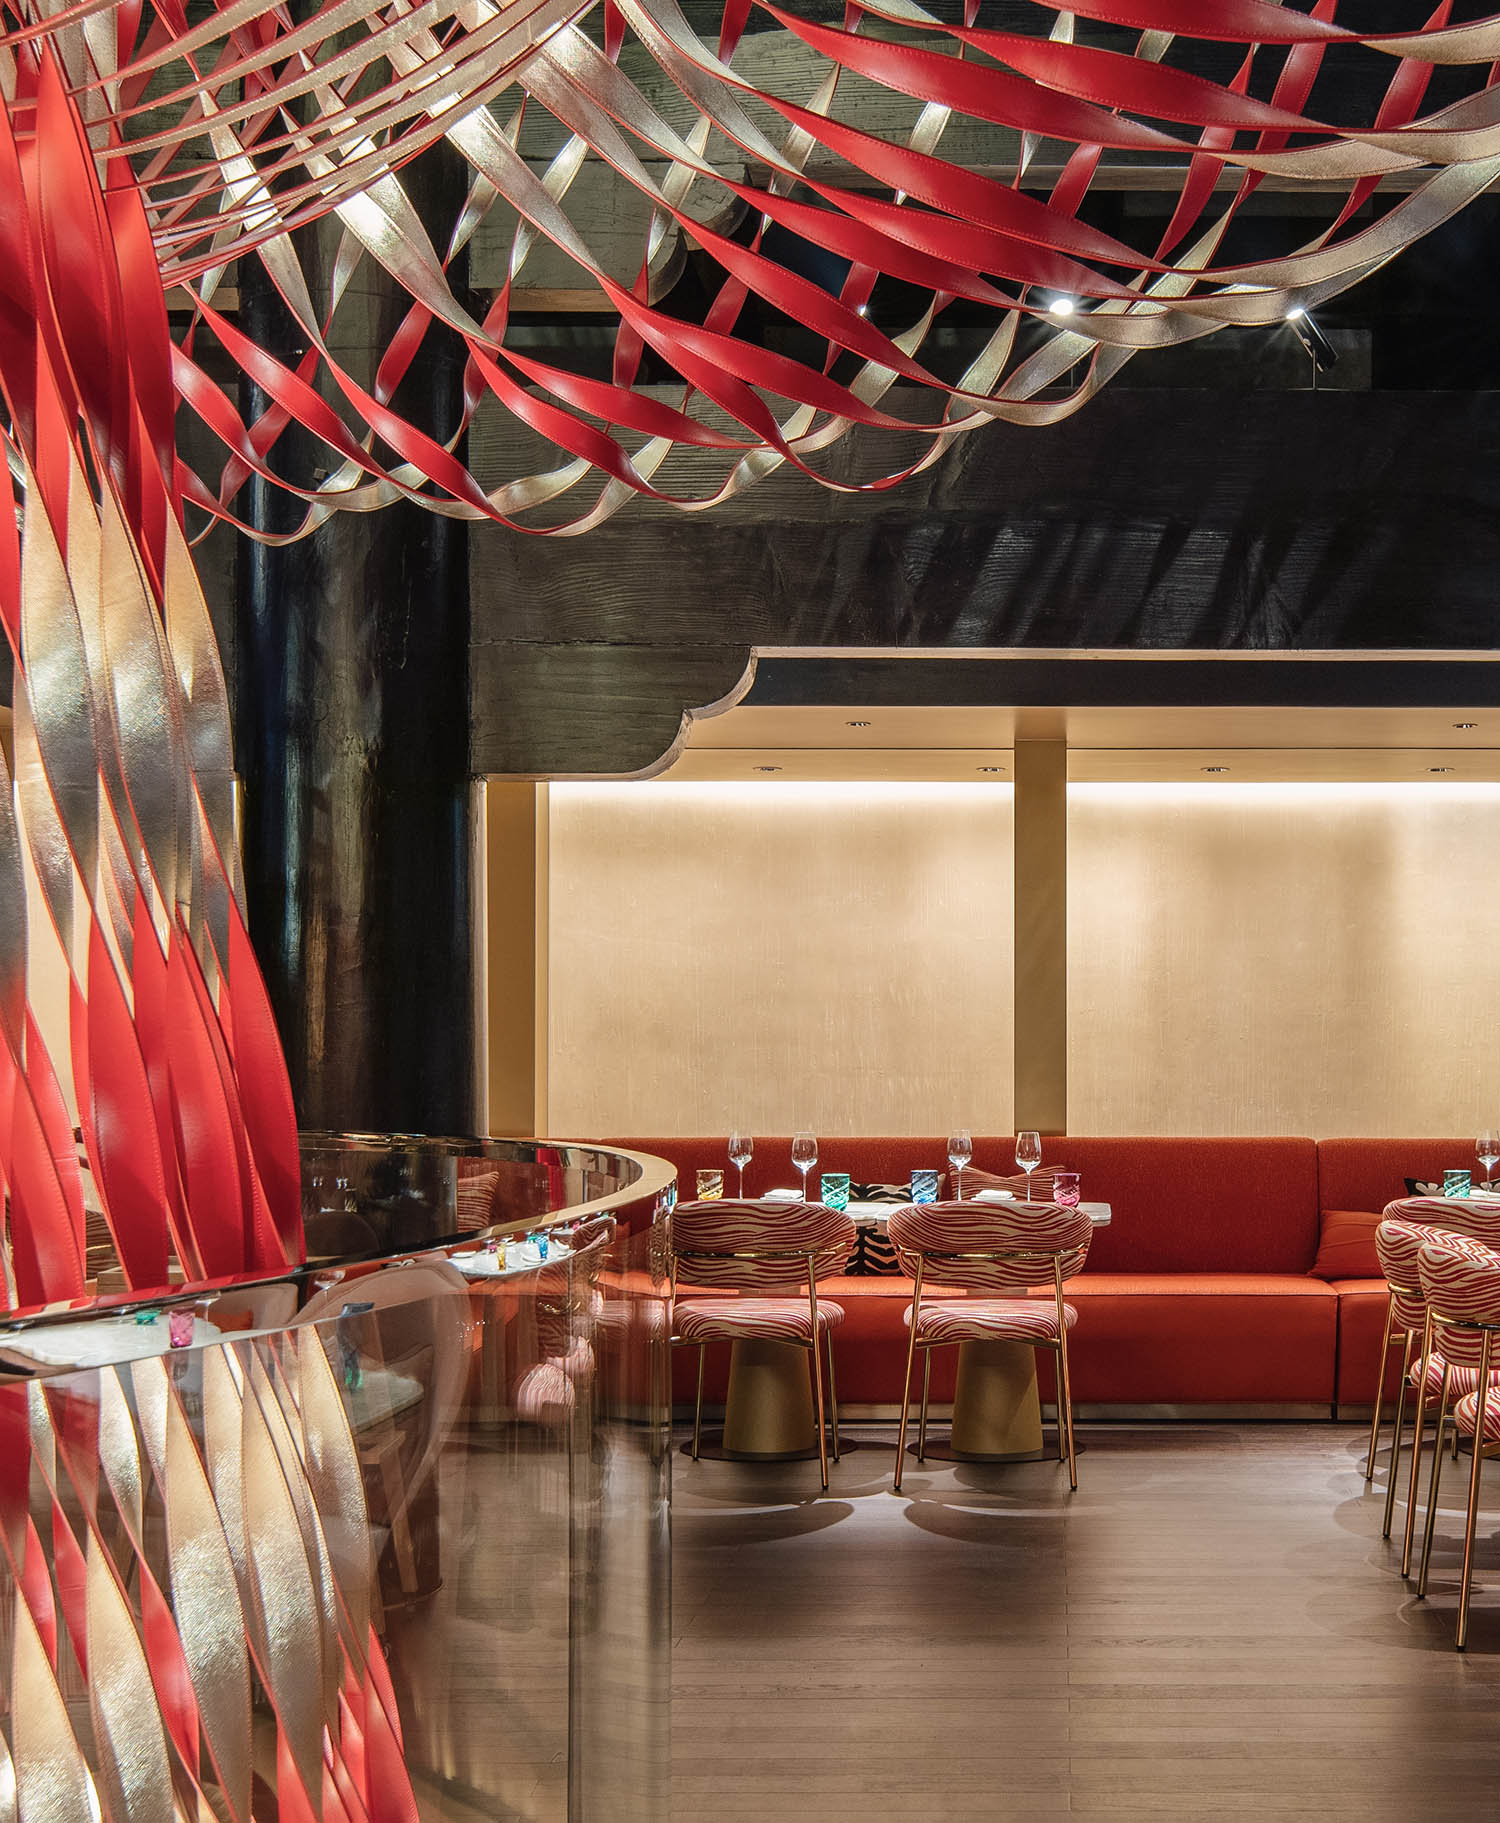 Louis Vuitton opens its first restaurant in China, The Hall